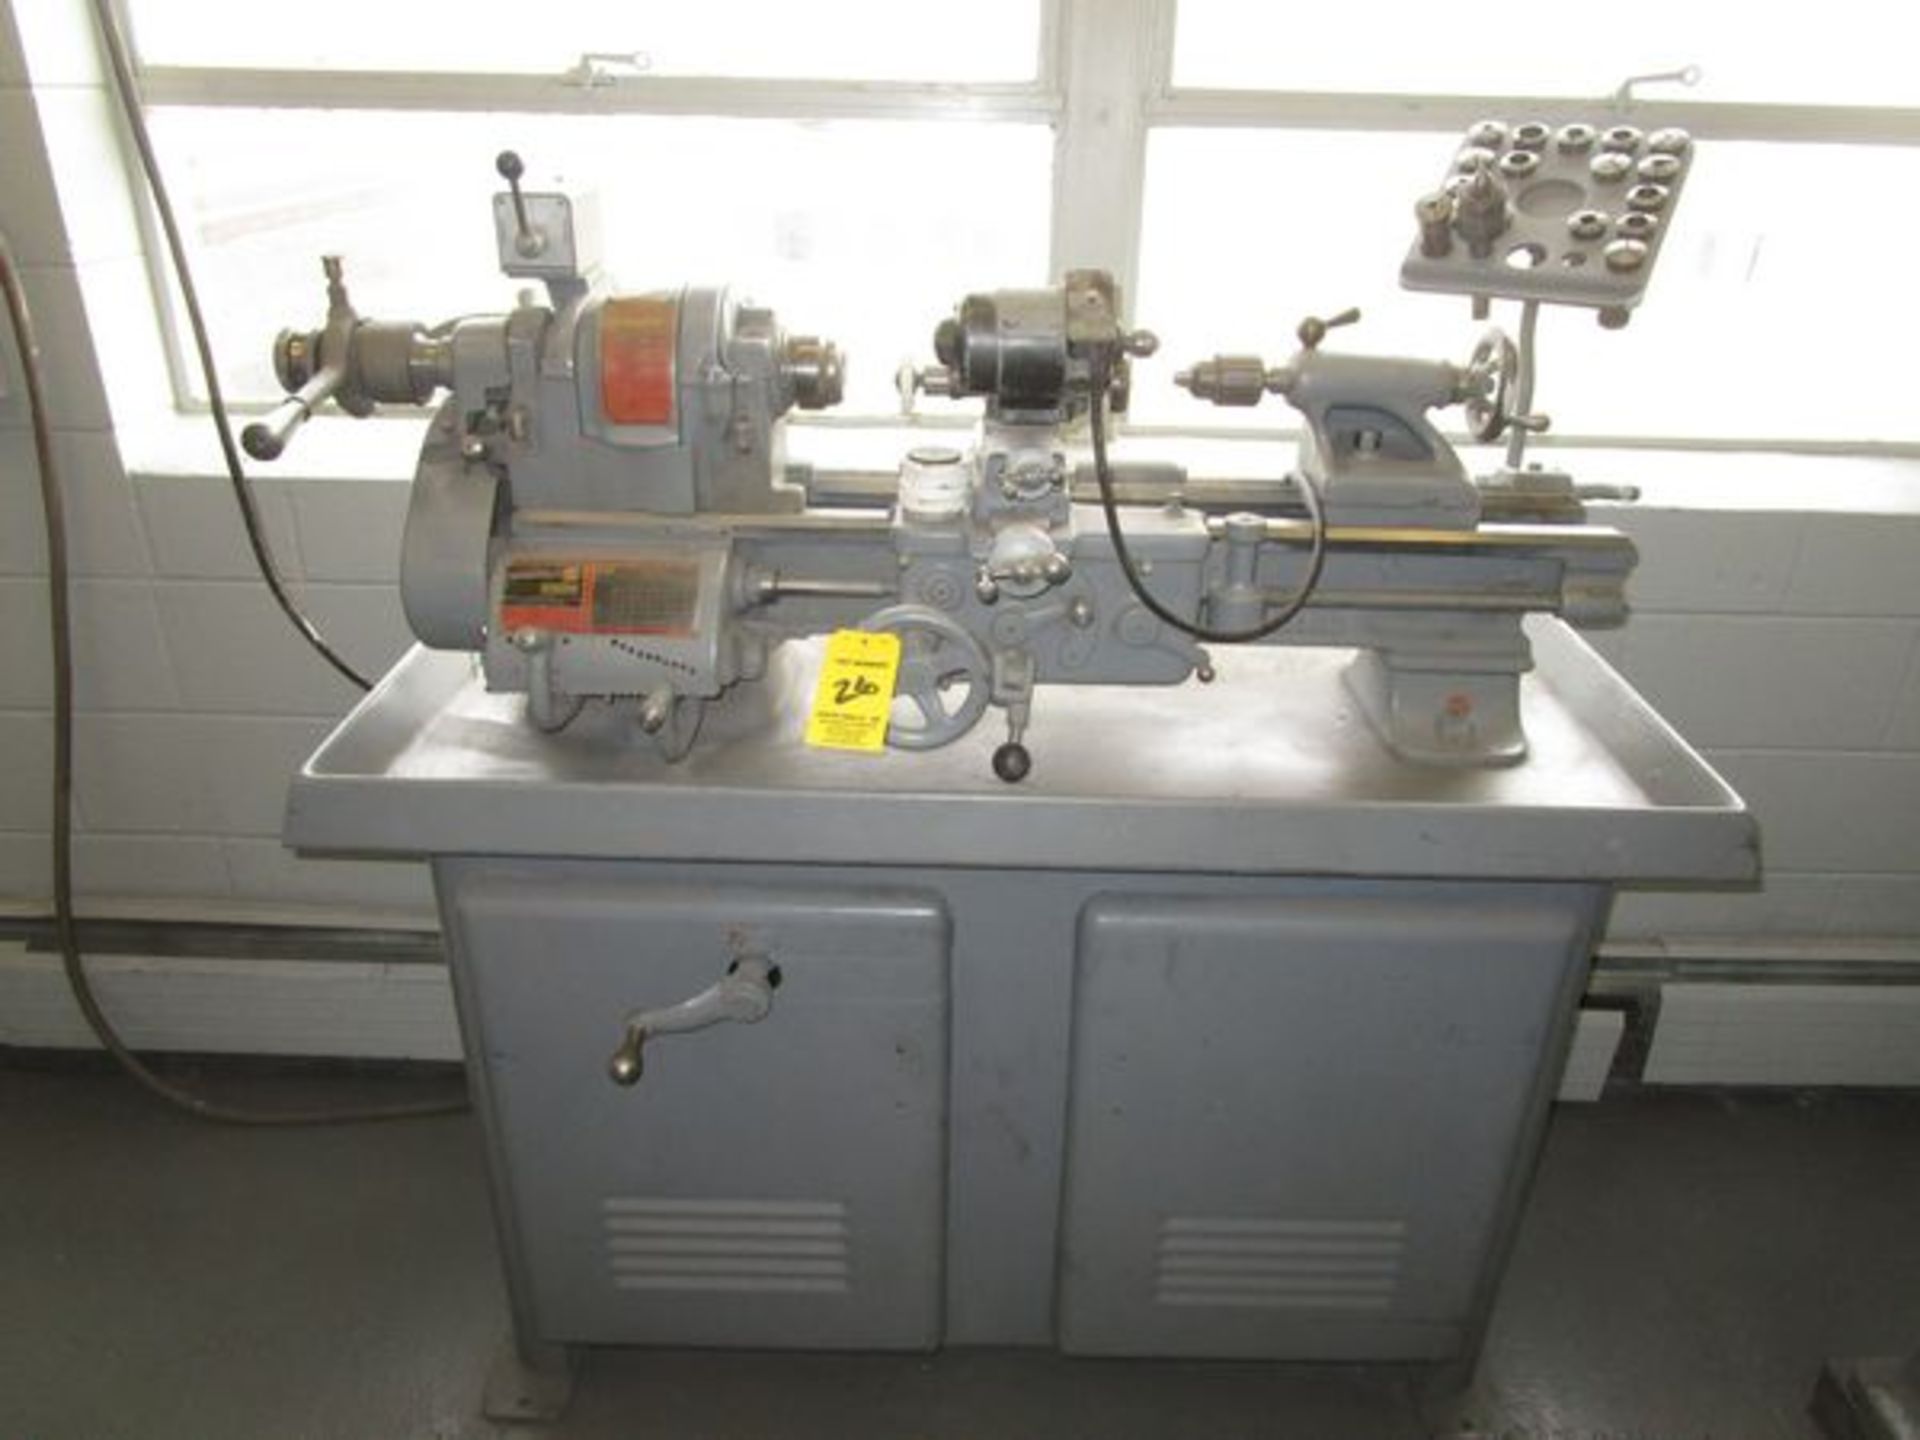 (1) Southbend CL187ZB 10" x 24" Lathe, S/N 18642RKX w/ Dumore Tool Post Grinder, Collets, Live